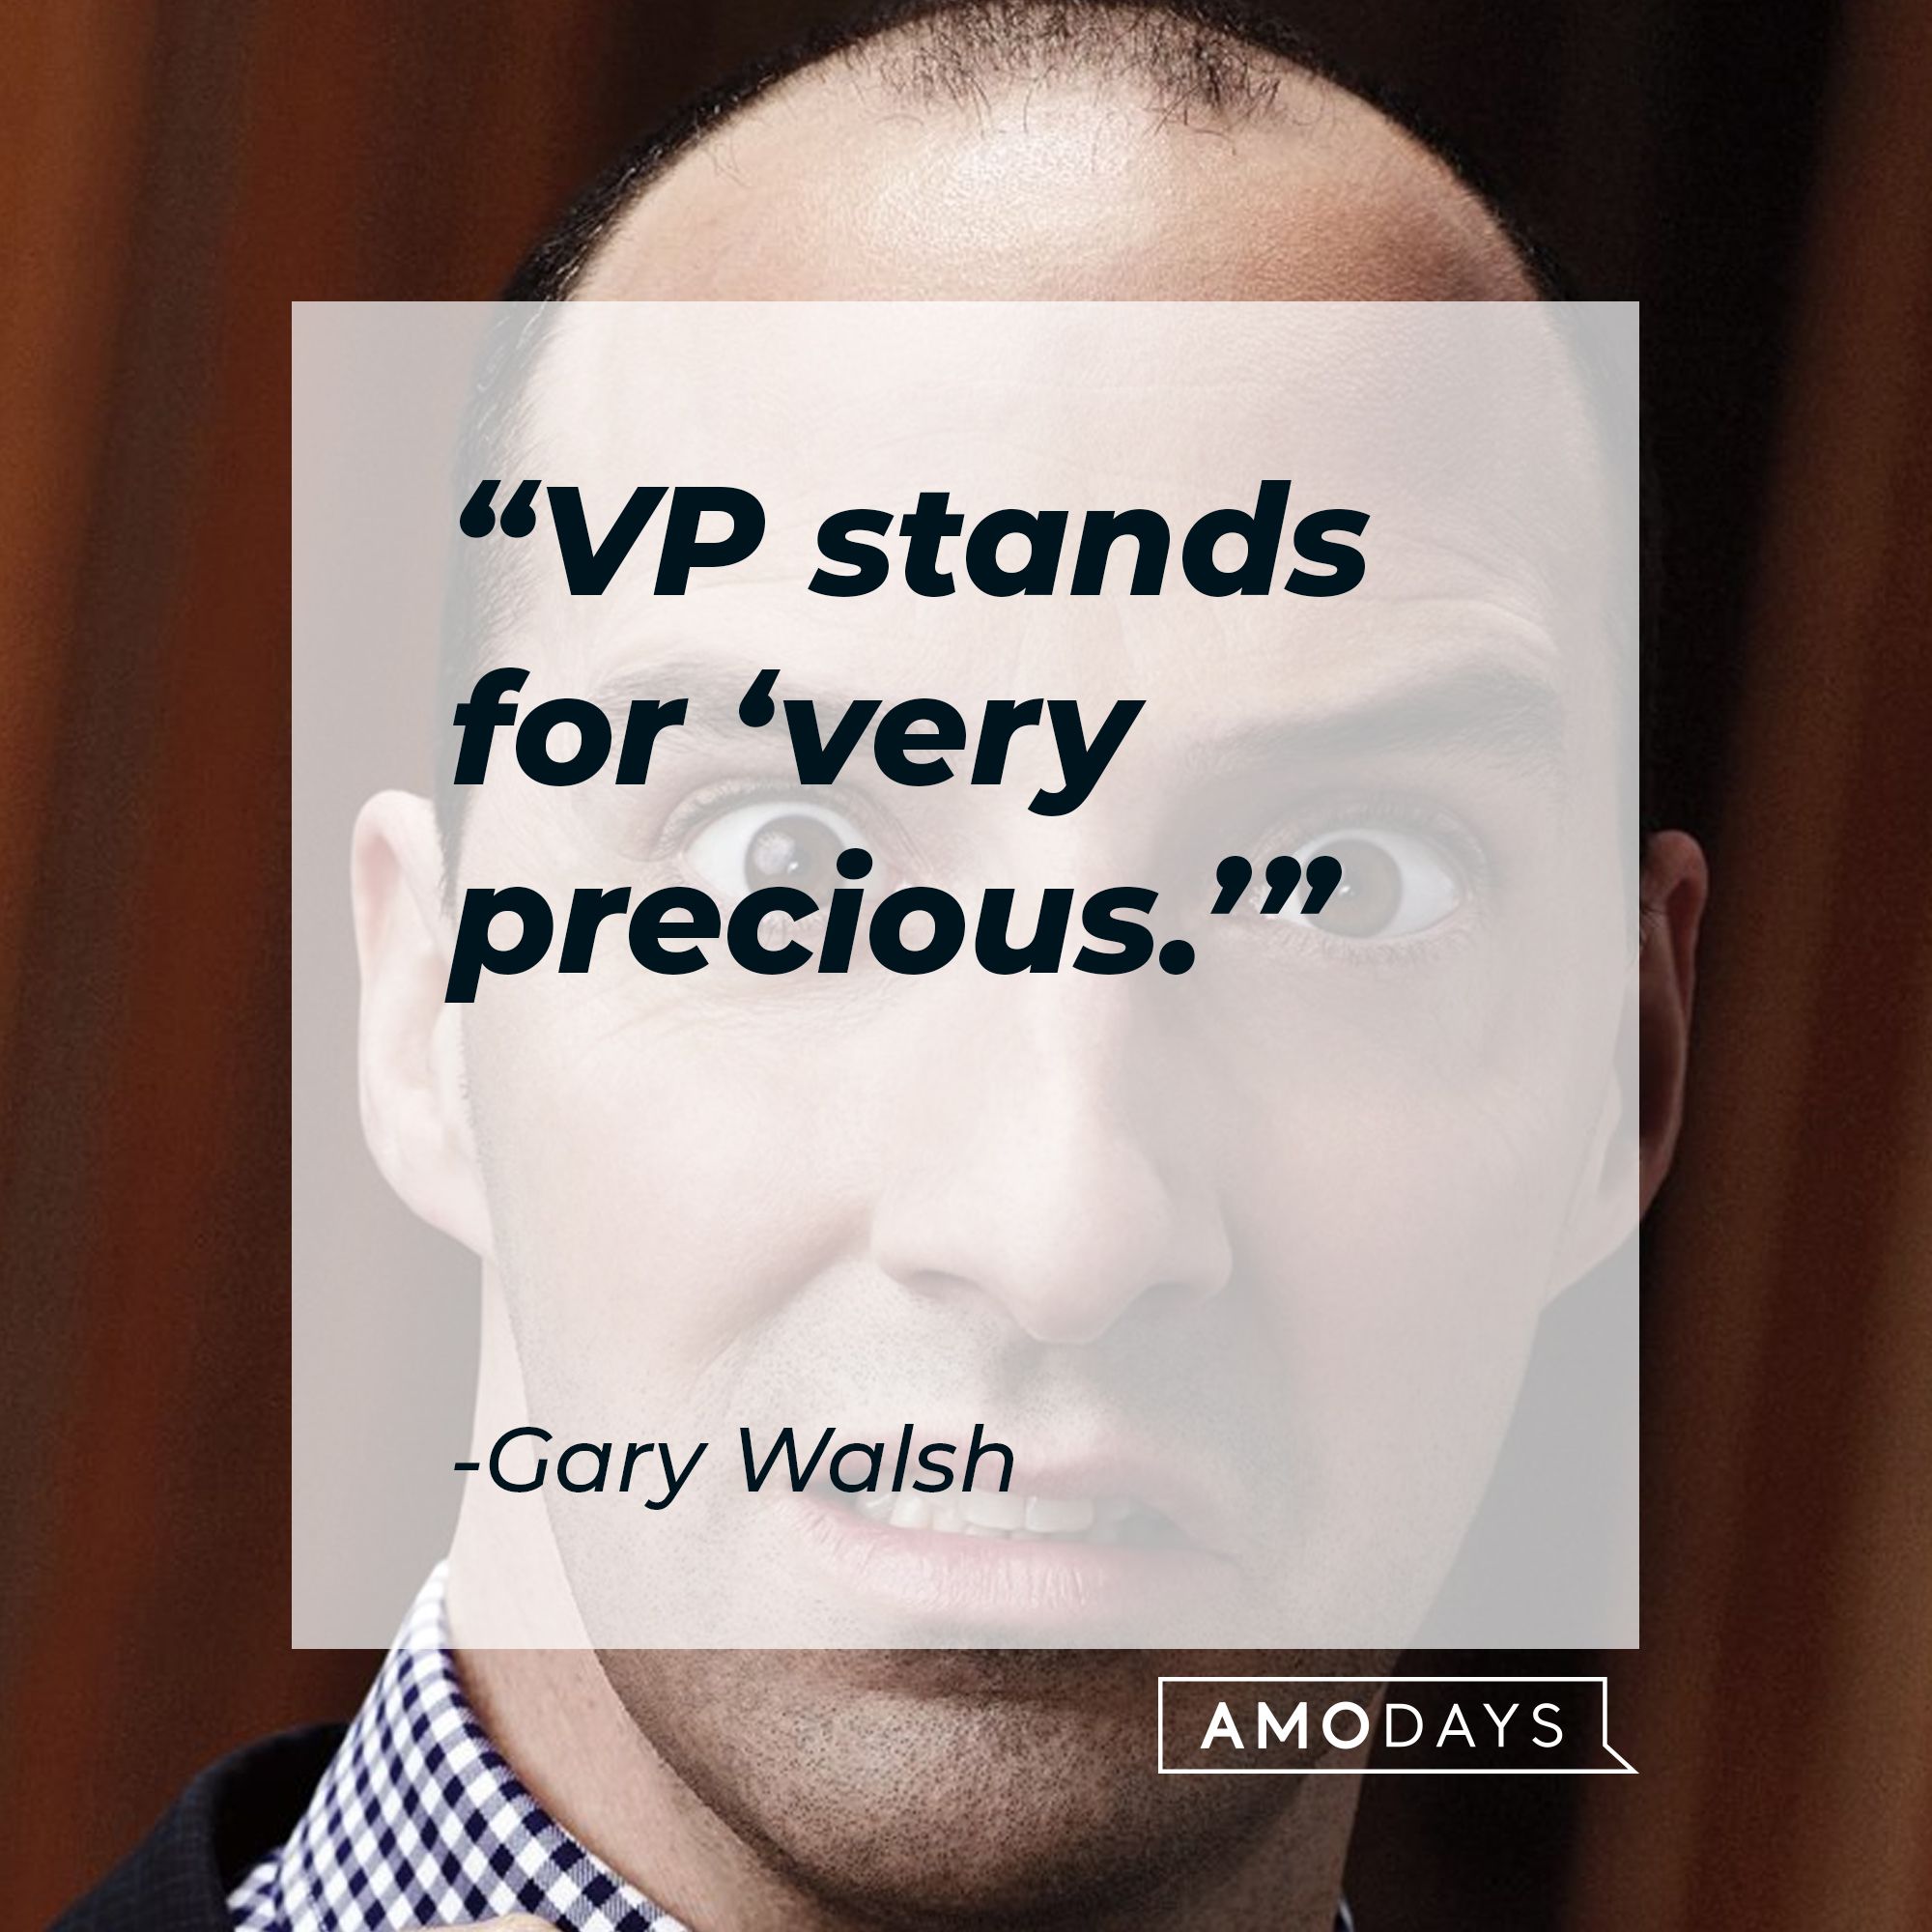 Gary Walsh, with his quote: "VP stands for 'very precious.'” | Source: Facebook.com/veep